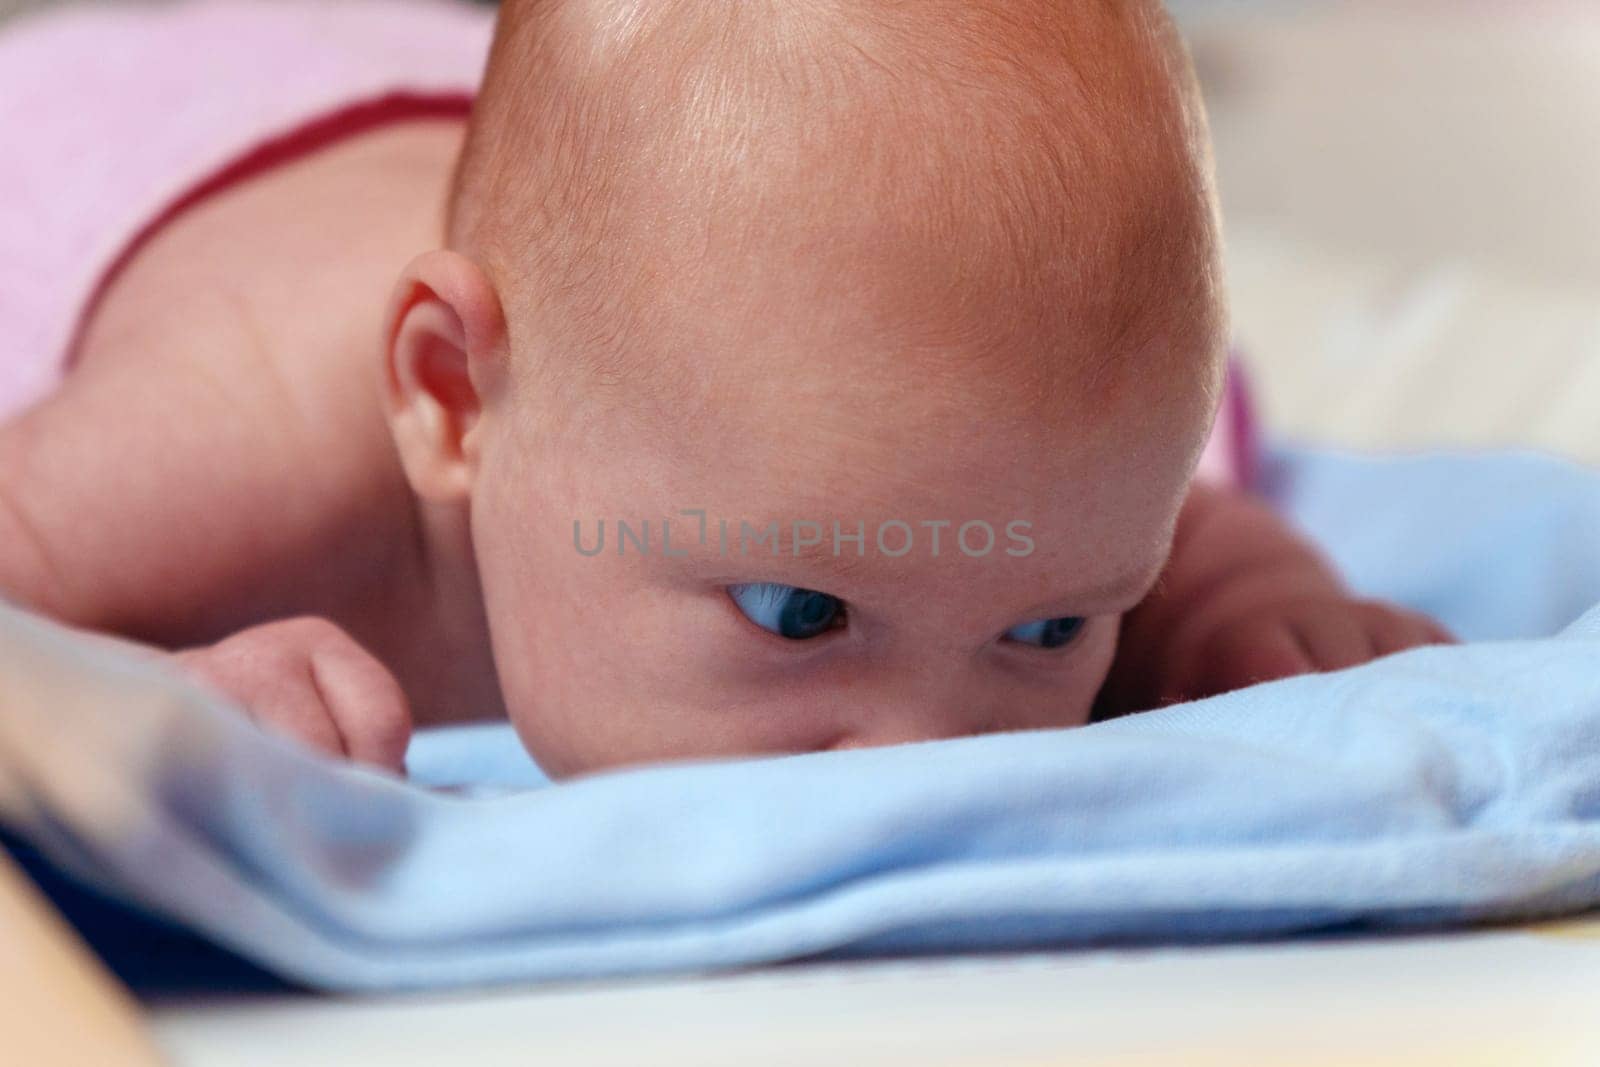 Early life, this close-up portrait reveals the tranquil beauty of a 2-month-old baby by darksoul72